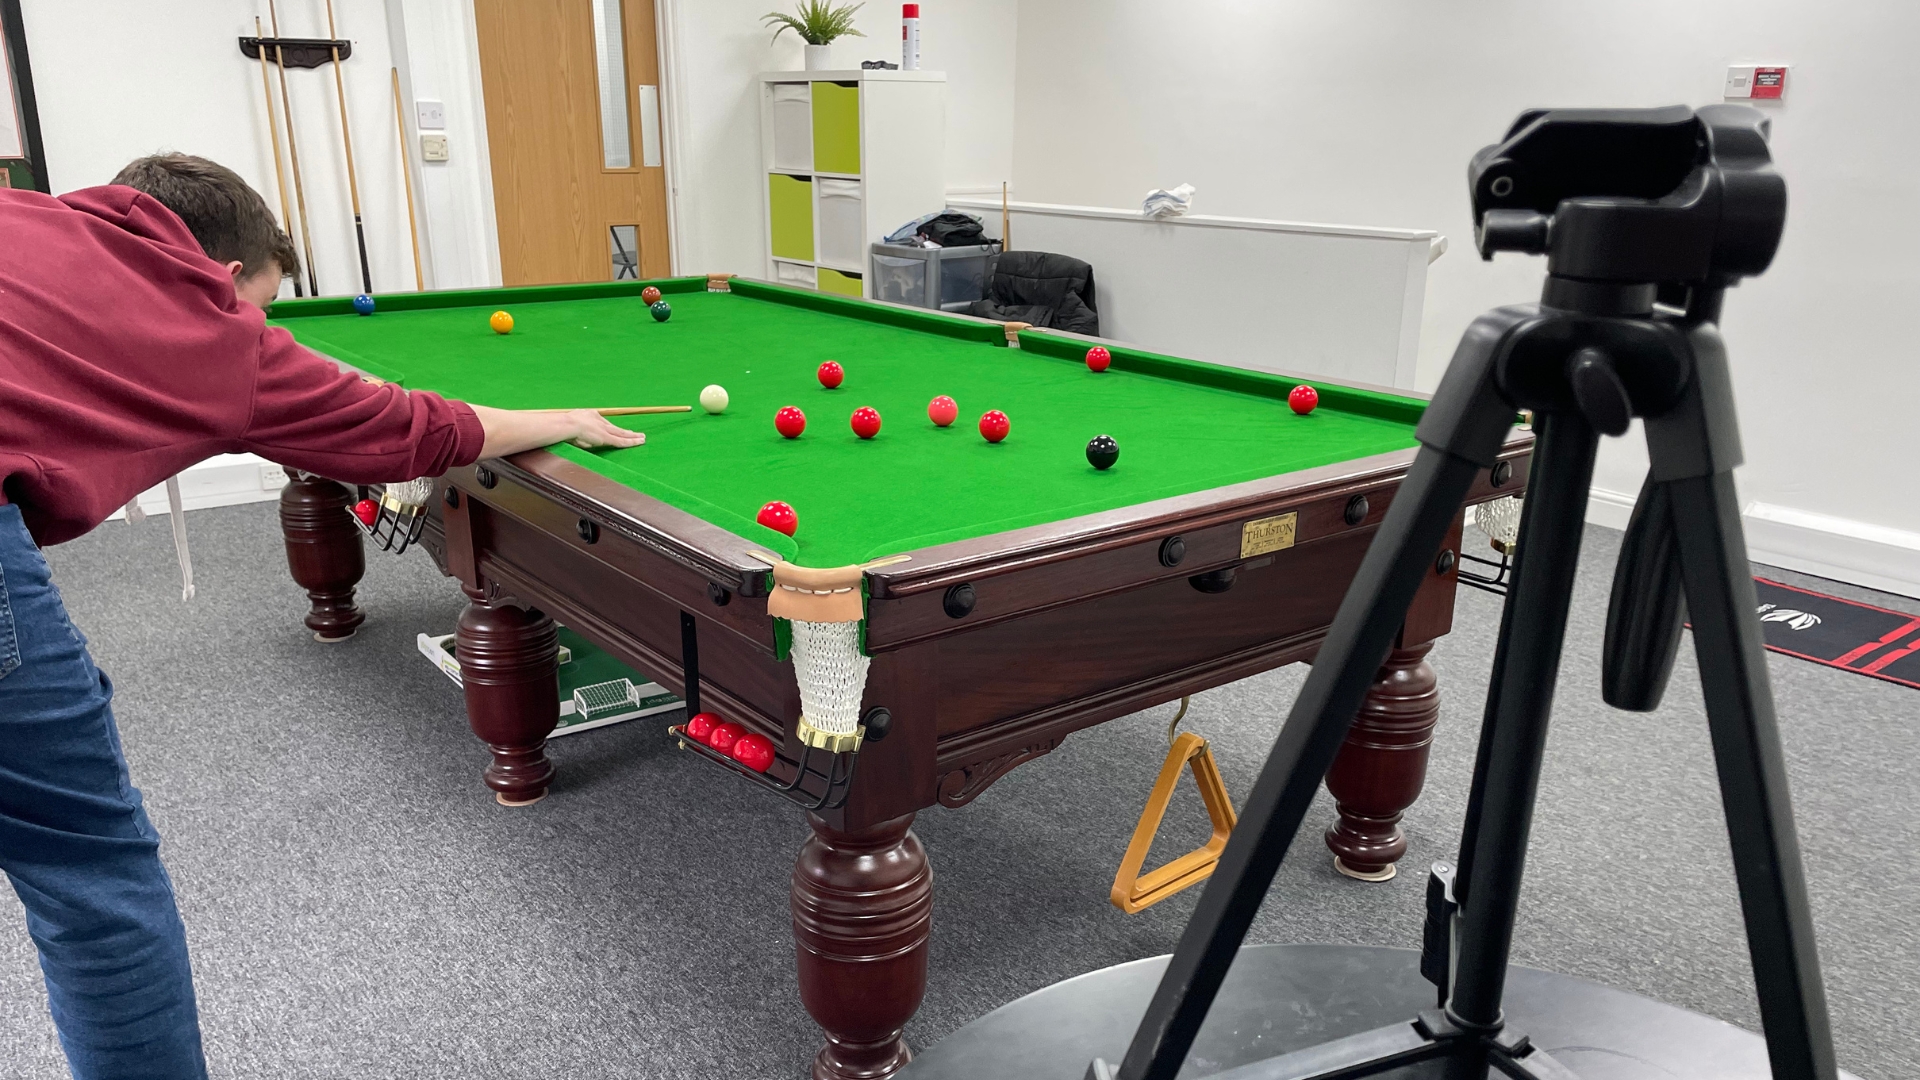 Options for filming your snooker matches